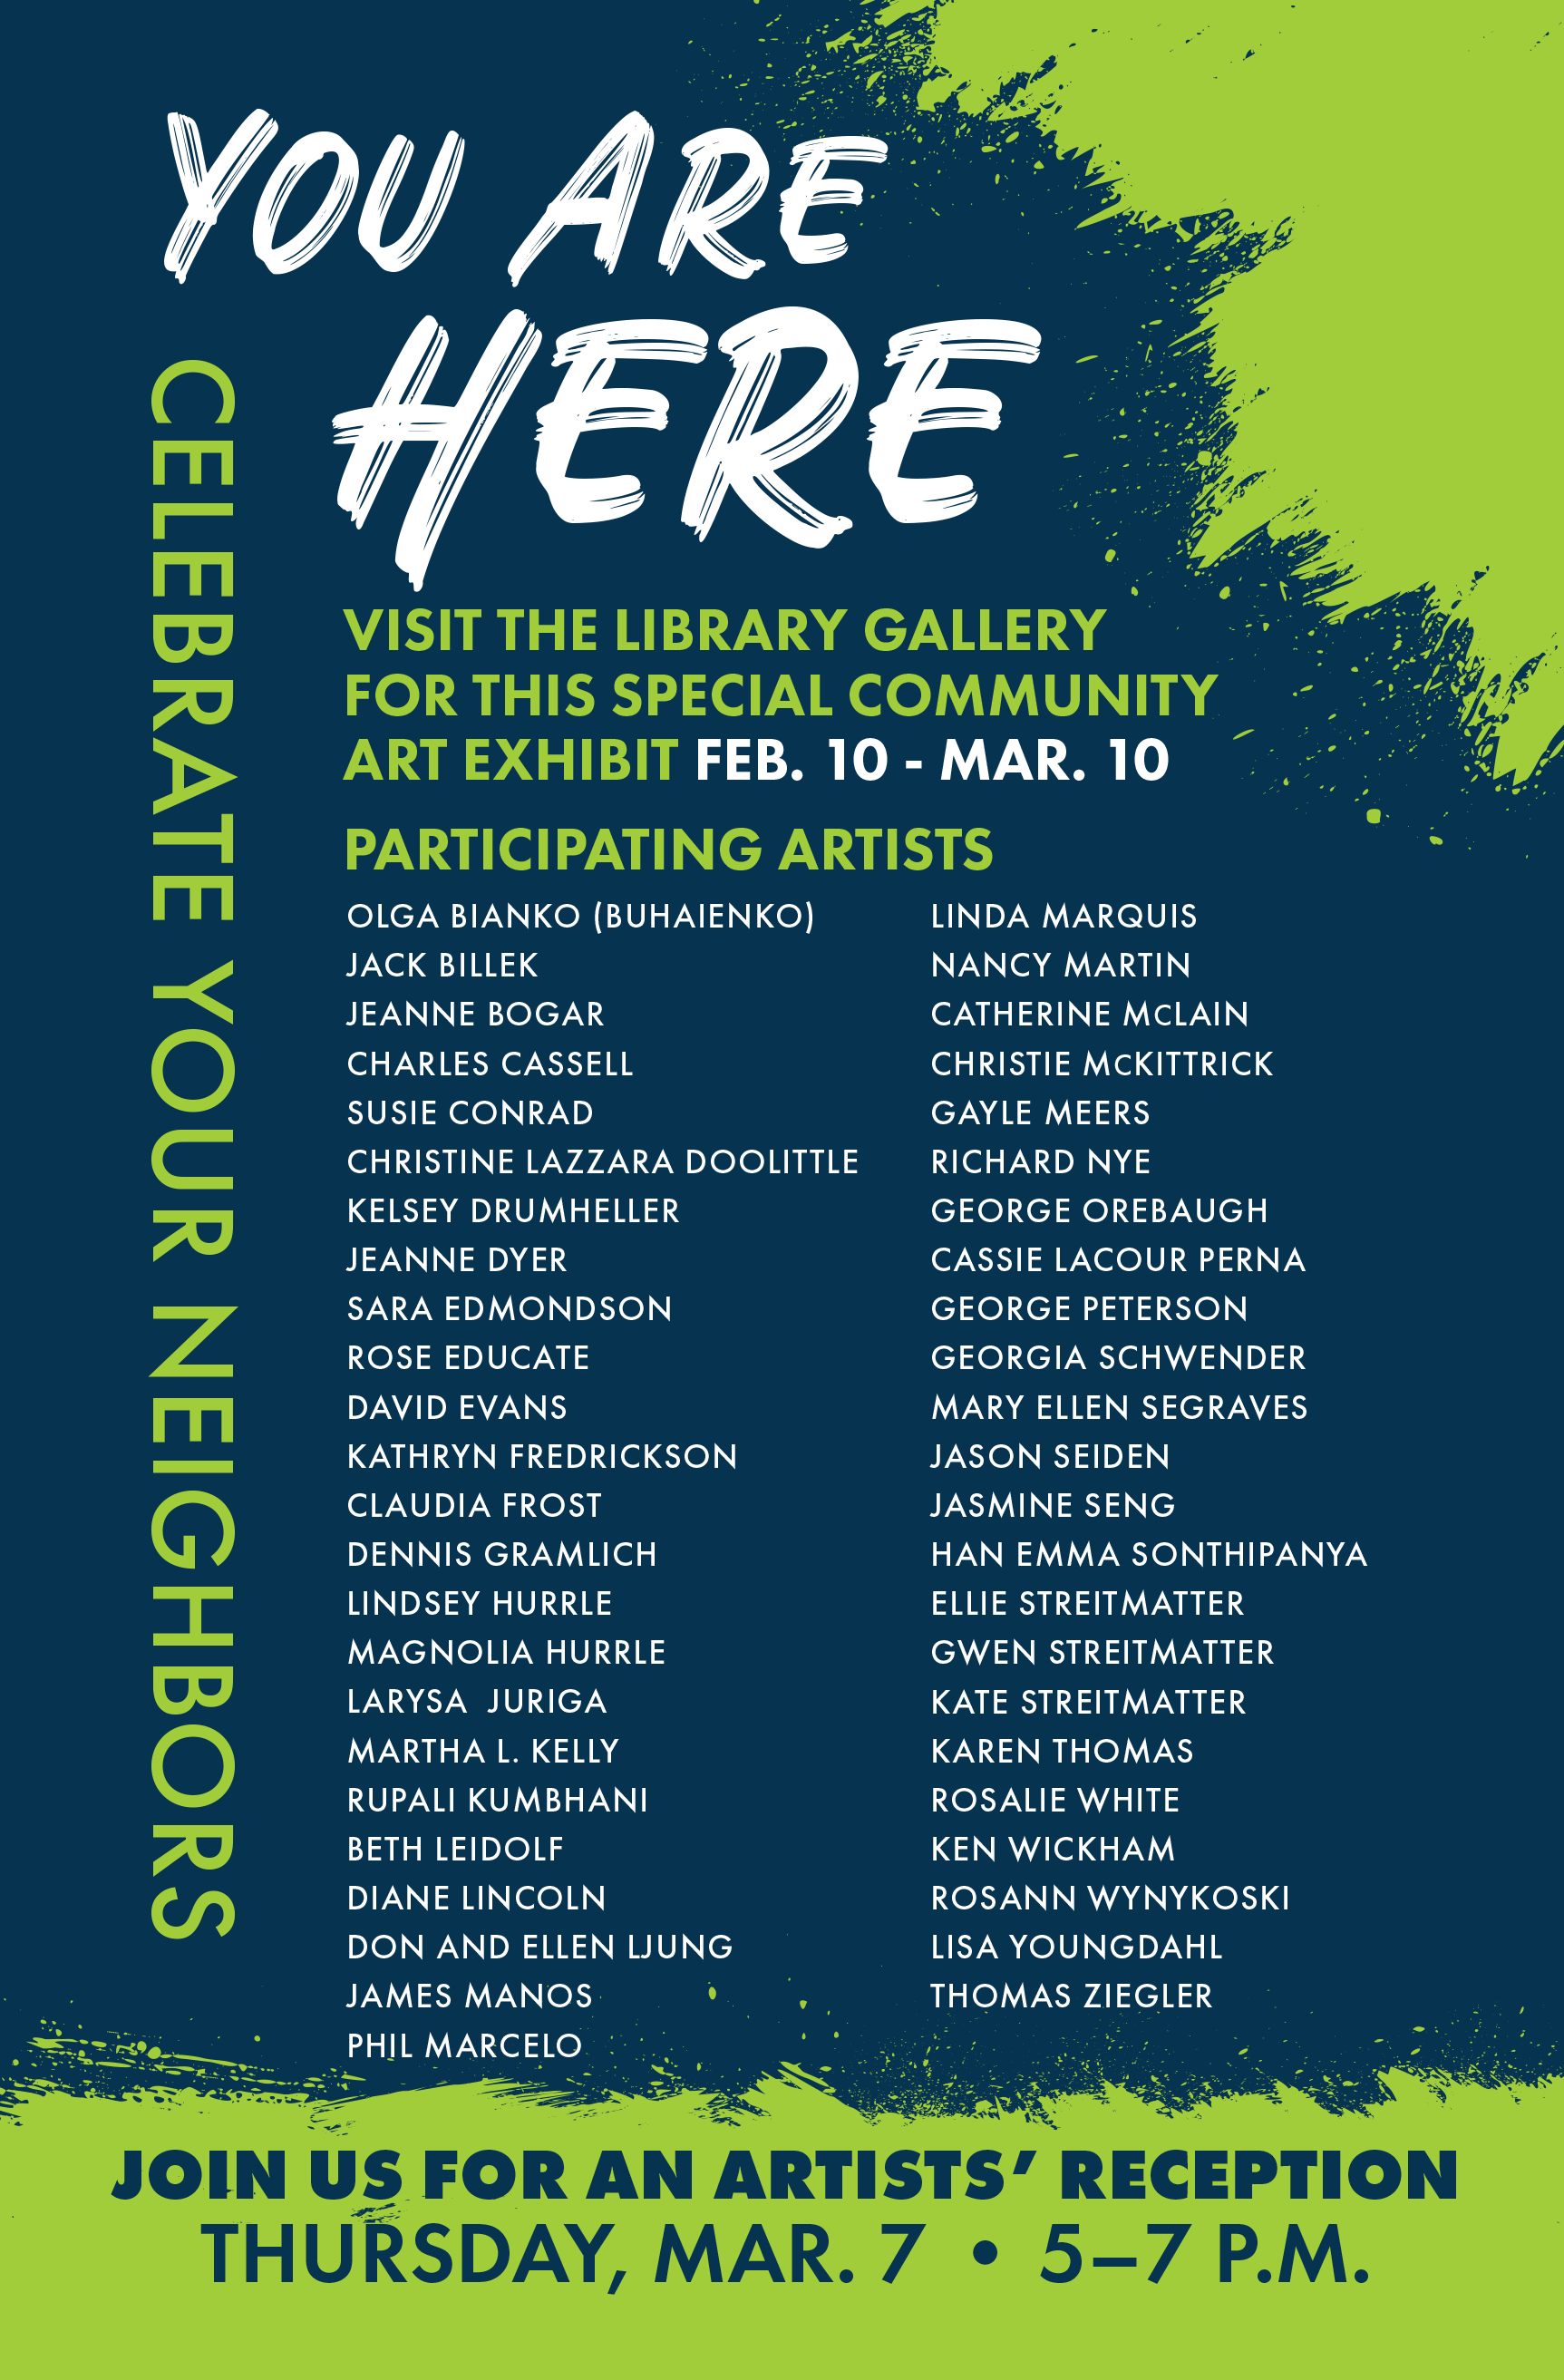 List of participating artists in the You Are Here Art Show